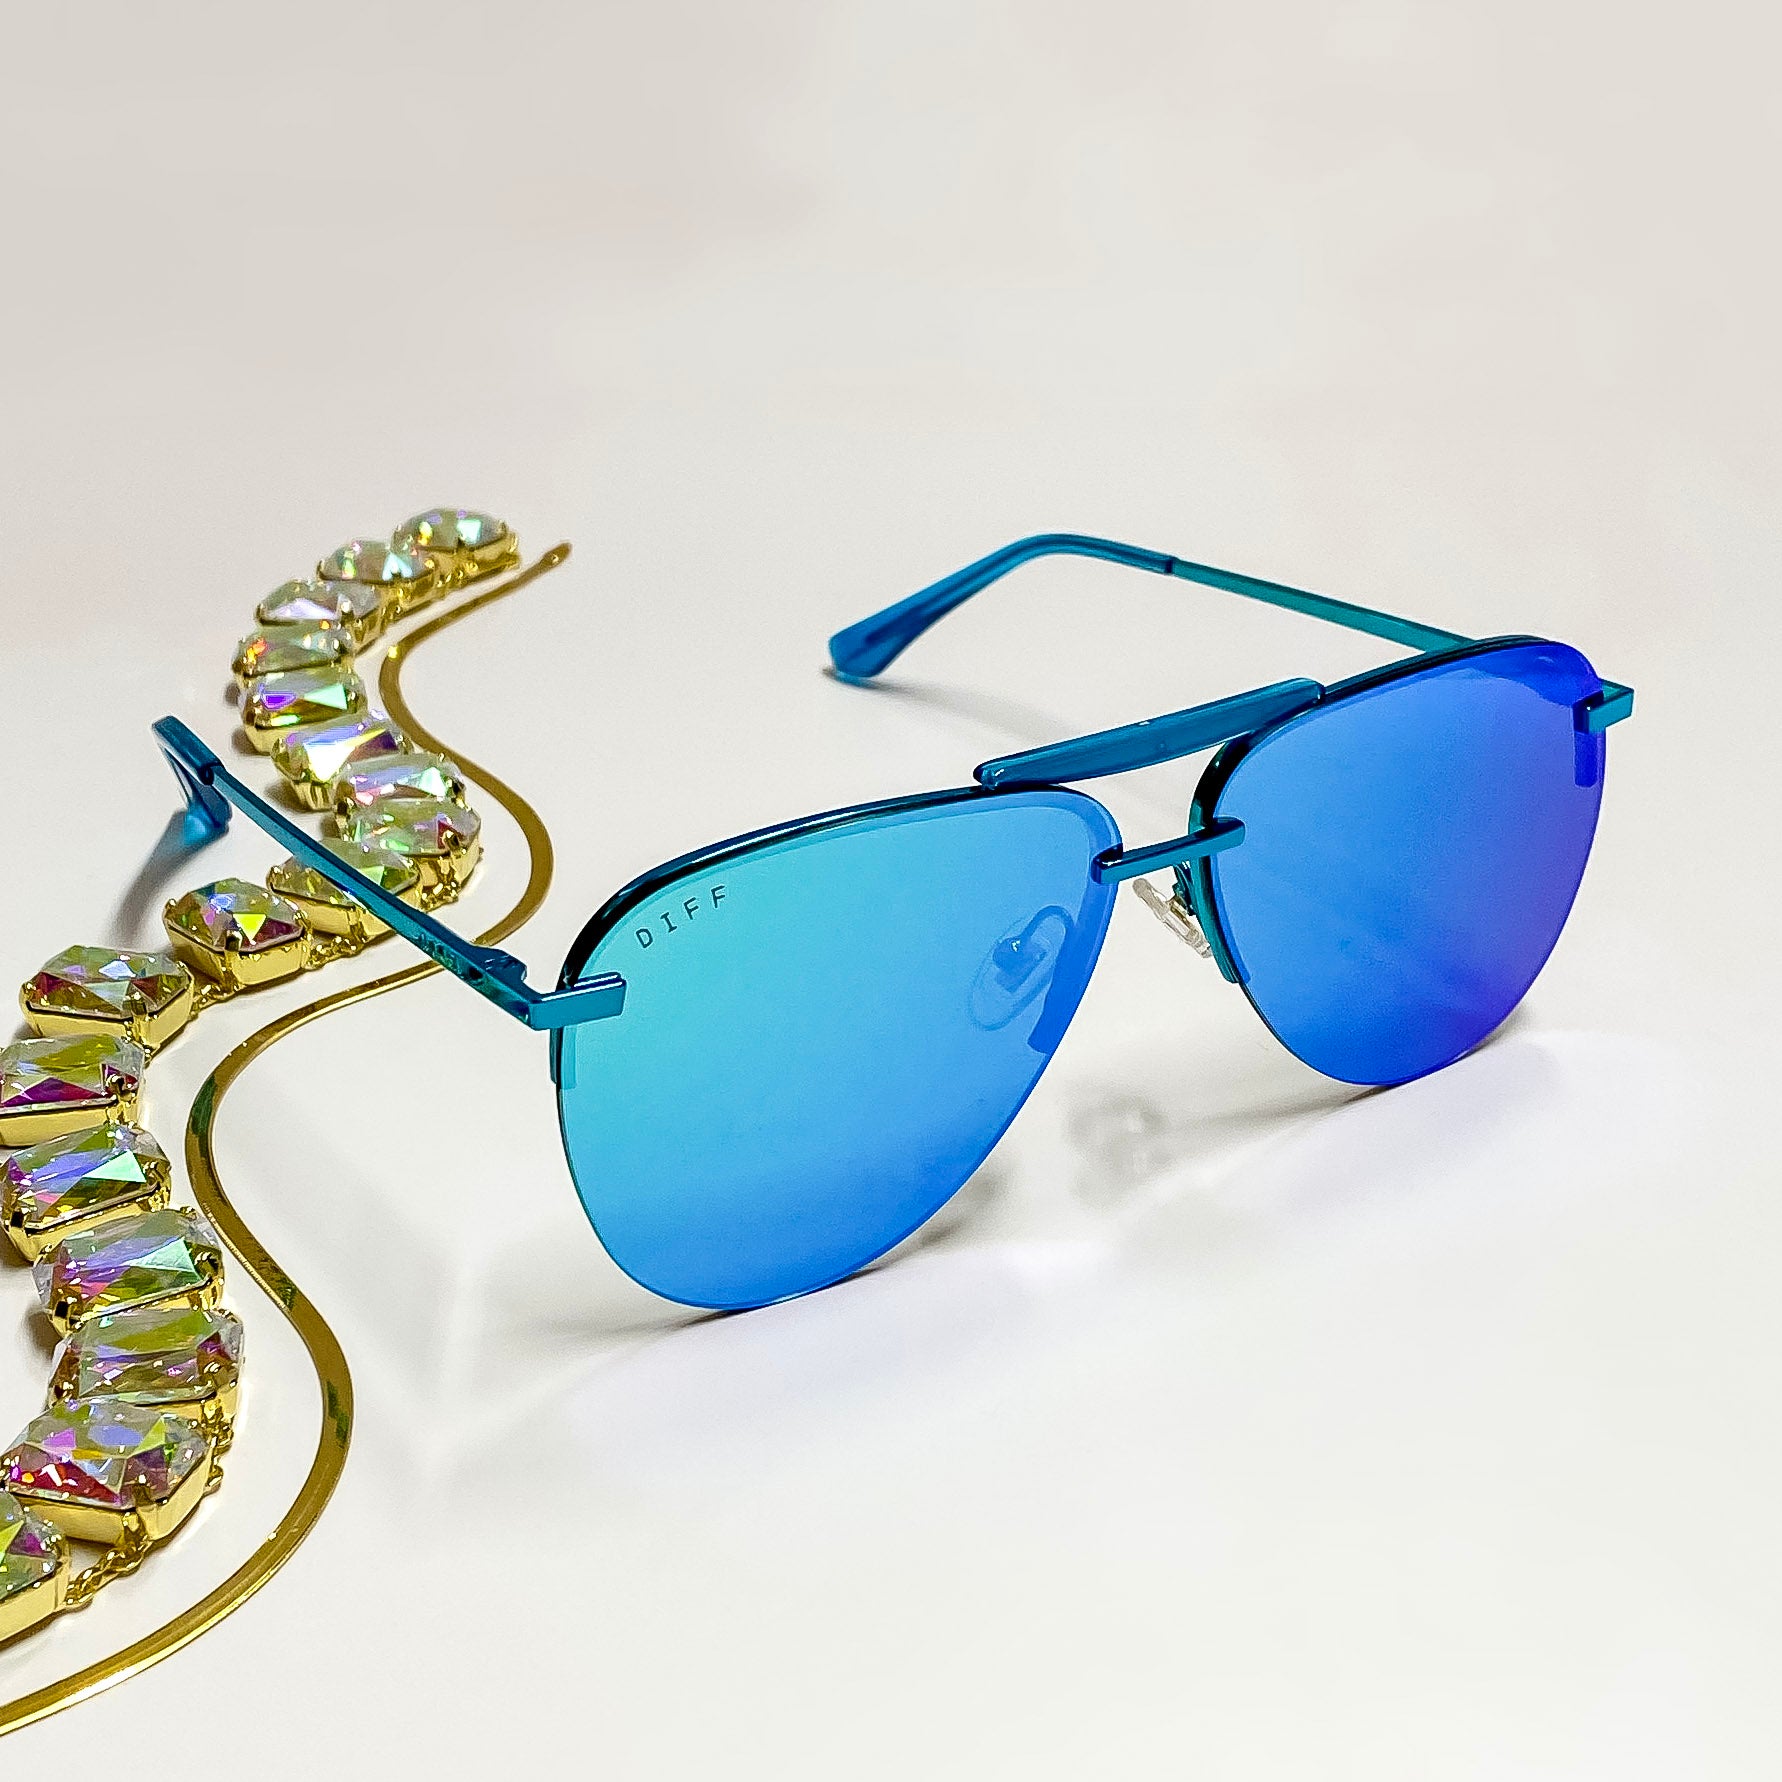 A pair of entirely metallic turquoise aviator style sunglasses